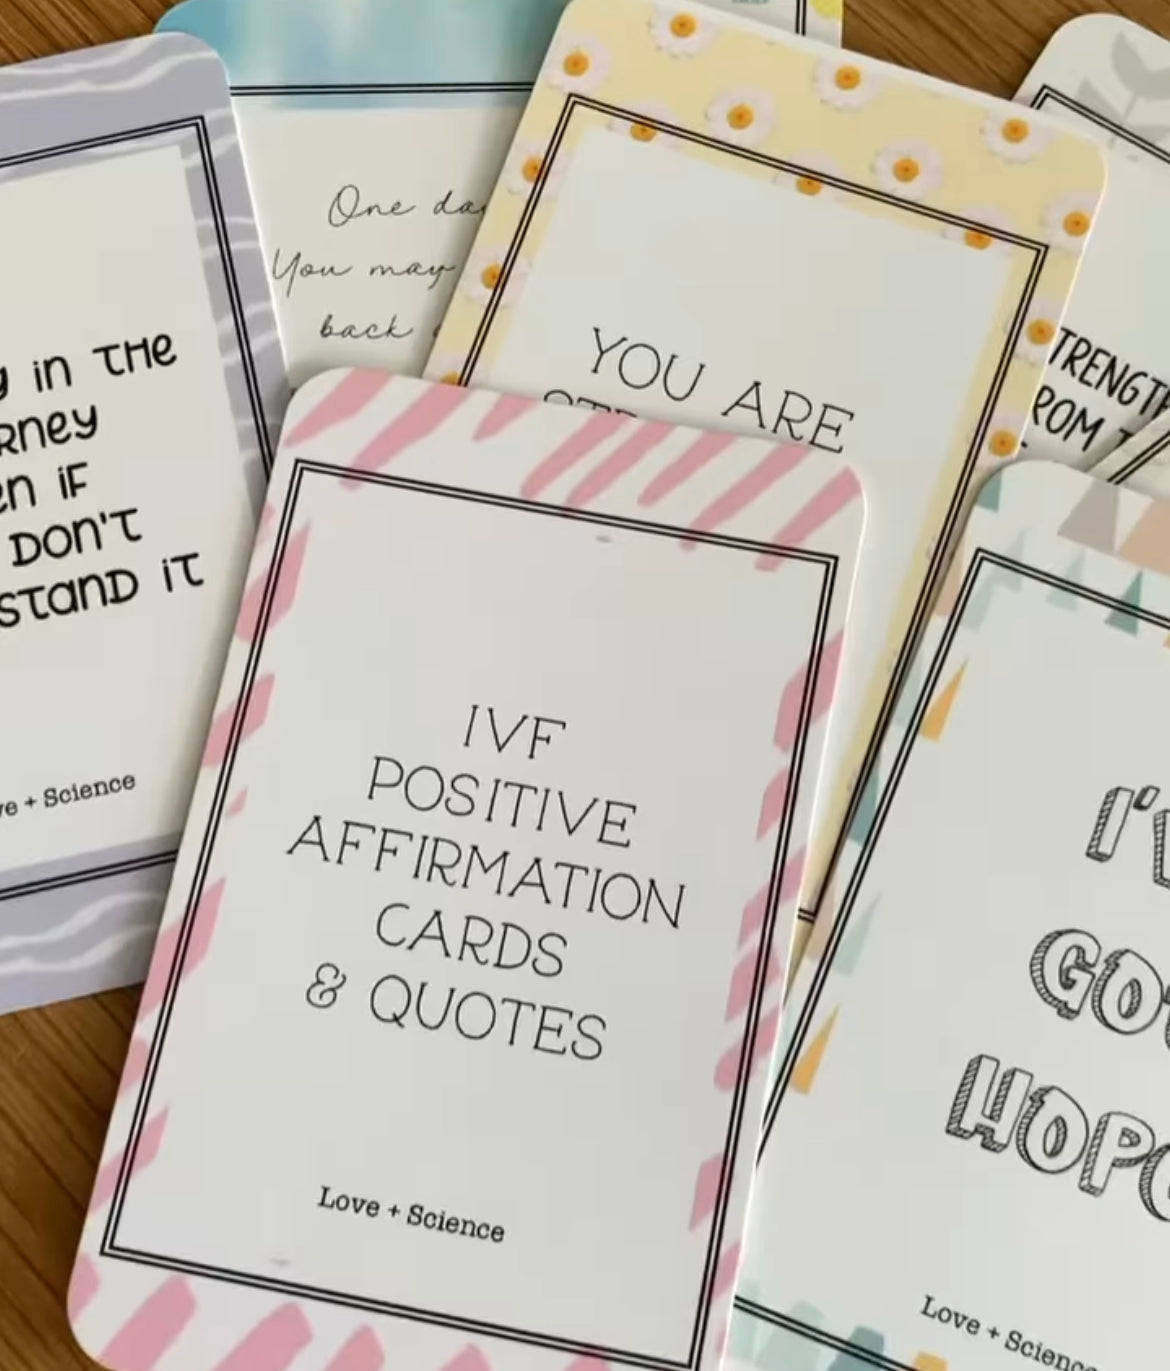 IVF Affirmation Cards & Quotes